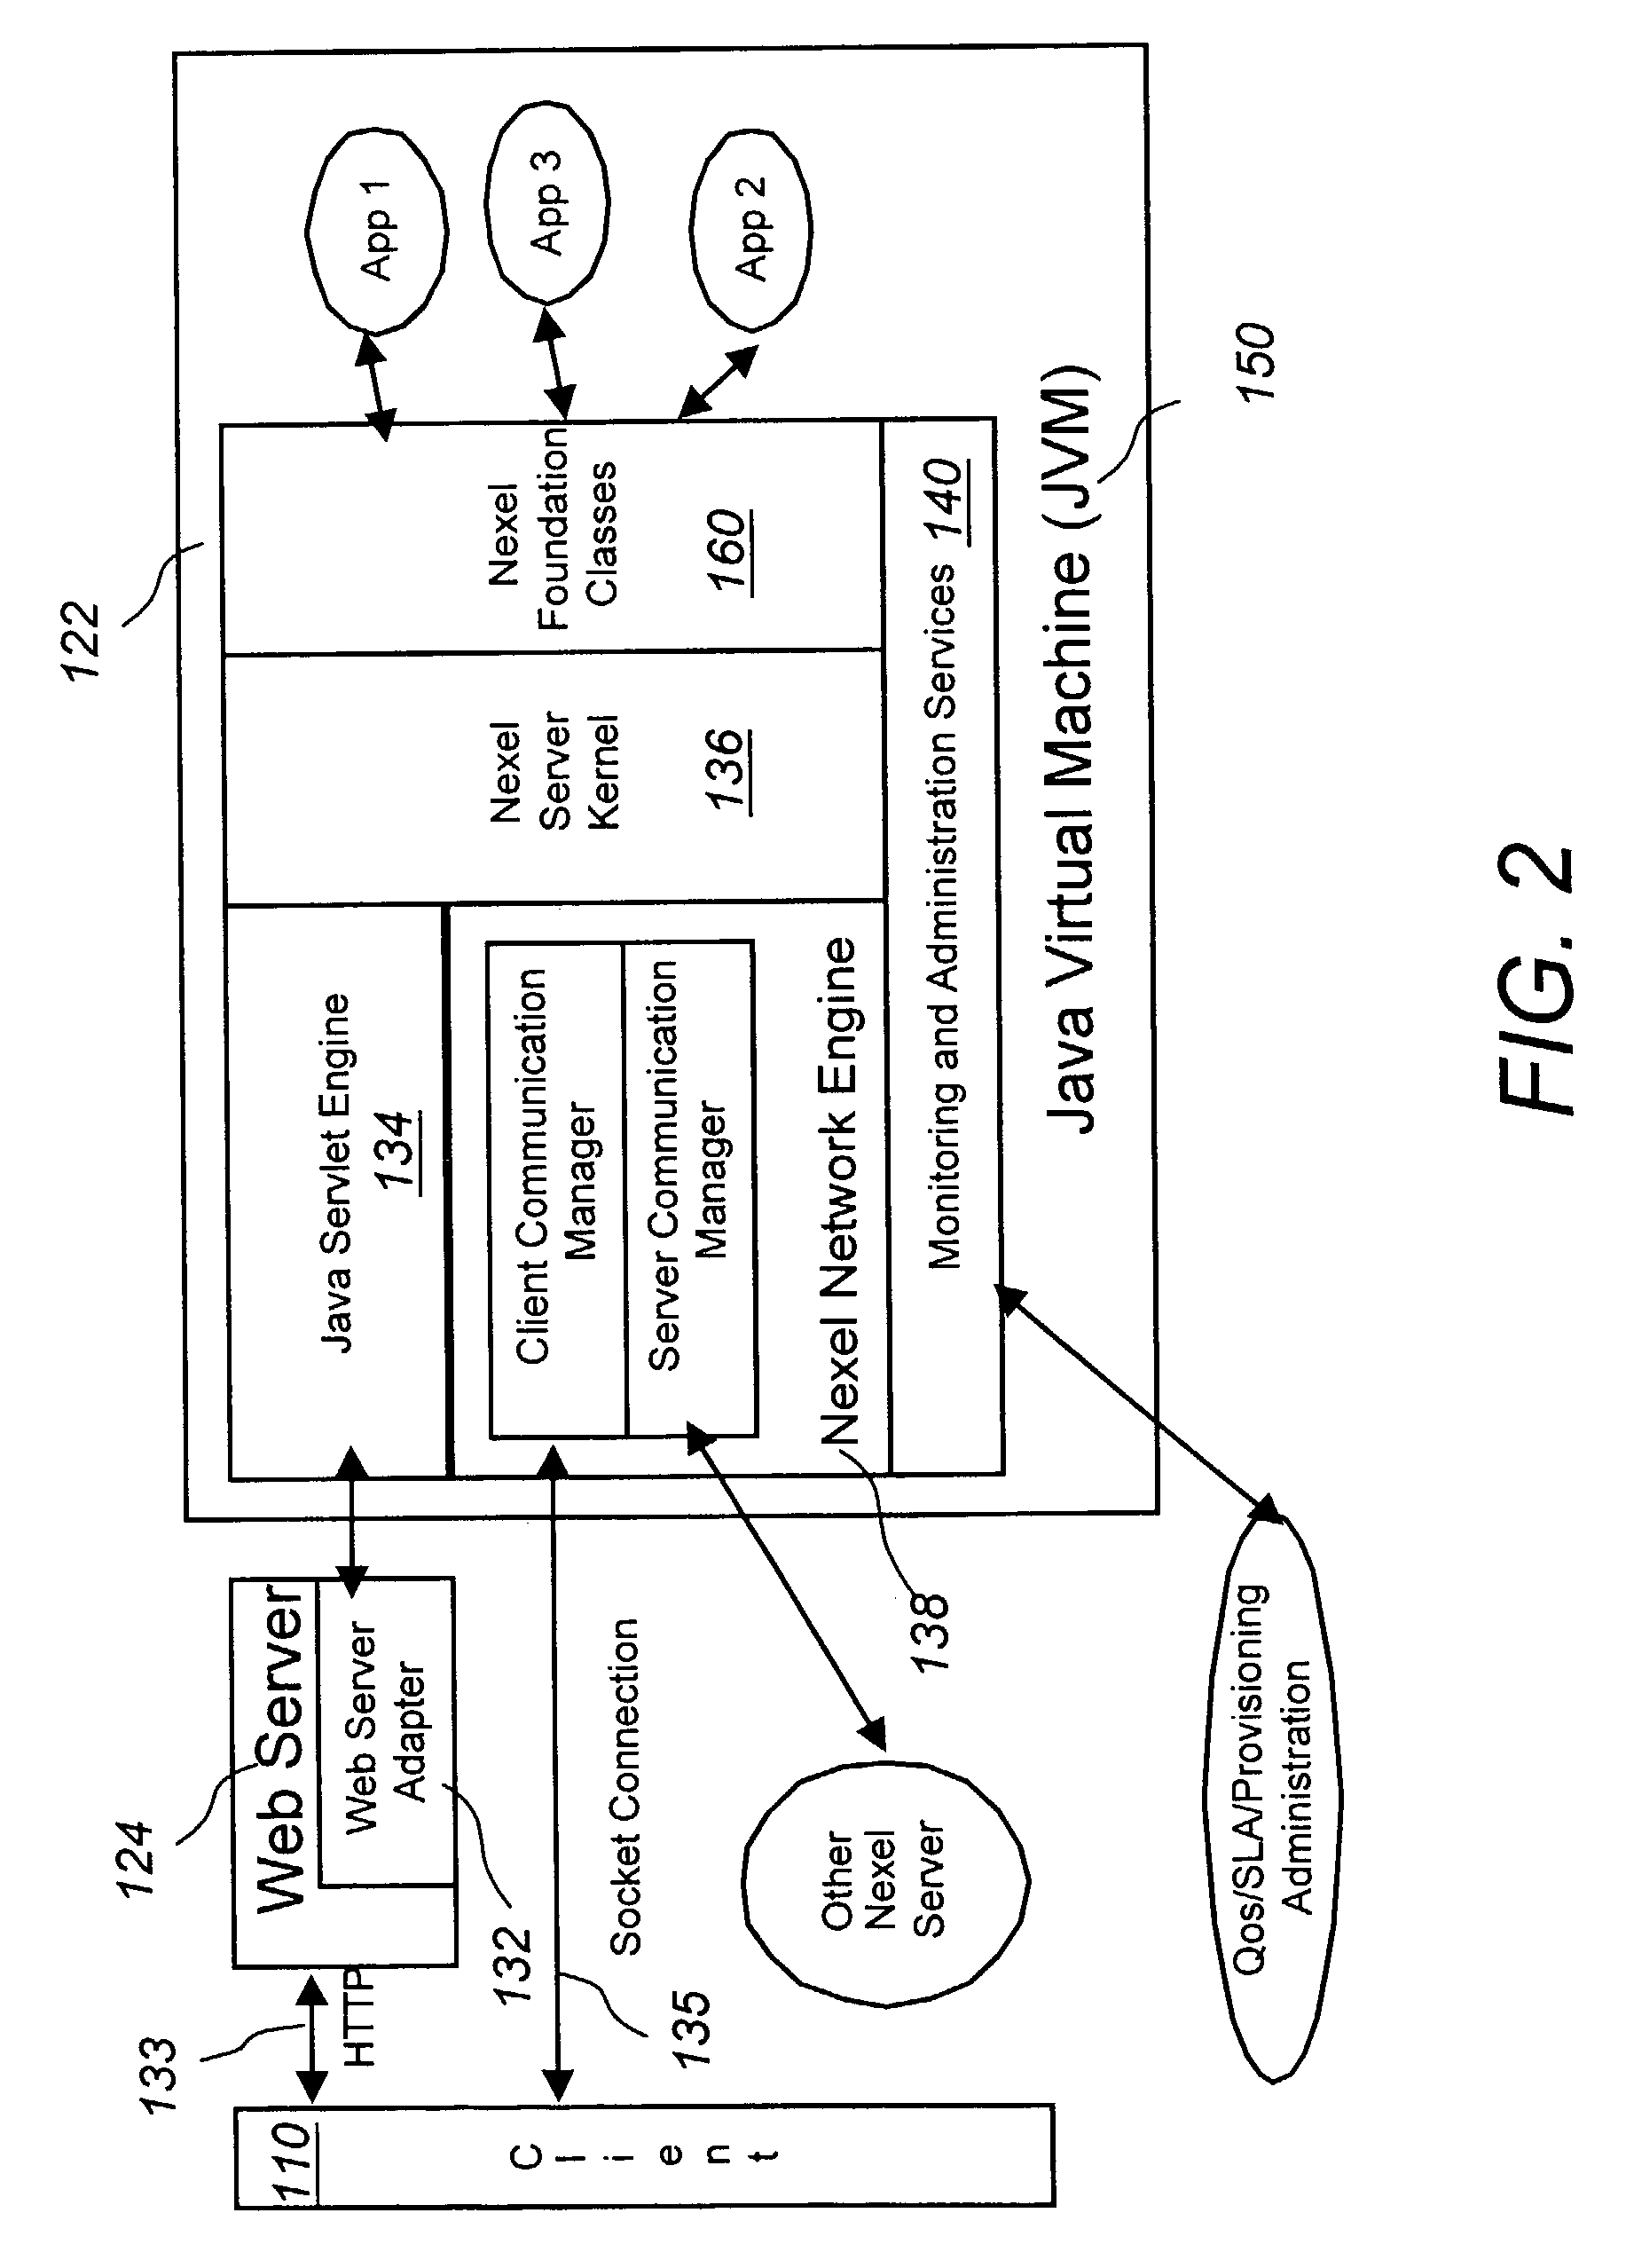 Methods and techniques for delivering rich Java applications over thin-wire connections with high performance and scalability